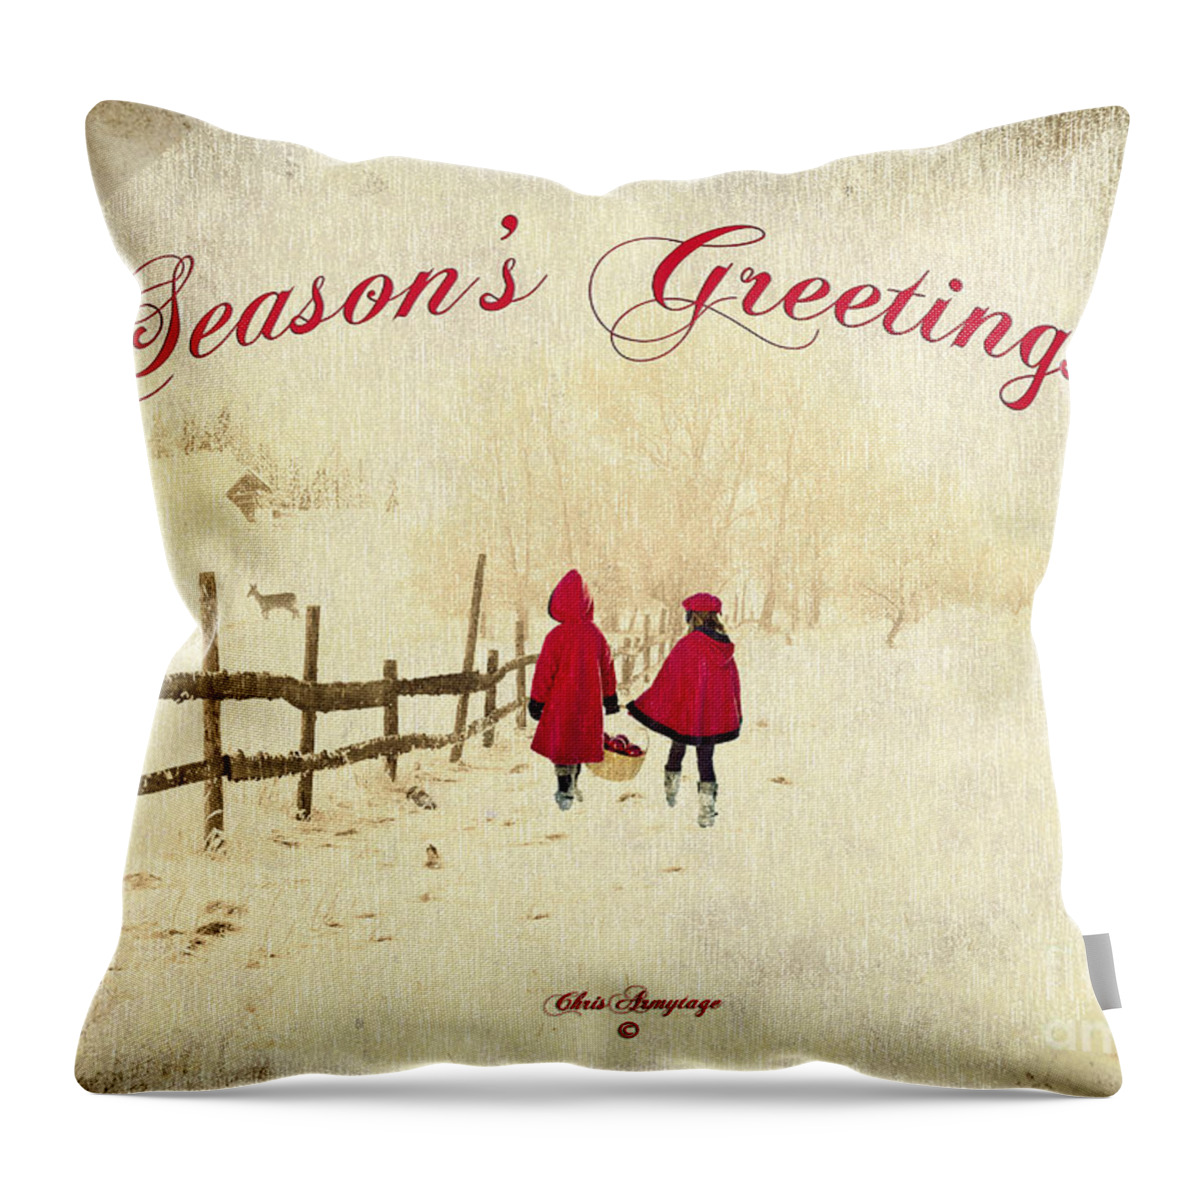 Digital Art Throw Pillow featuring the painting Season's Greetings - Delivering Festive Cheer by Chris Armytage